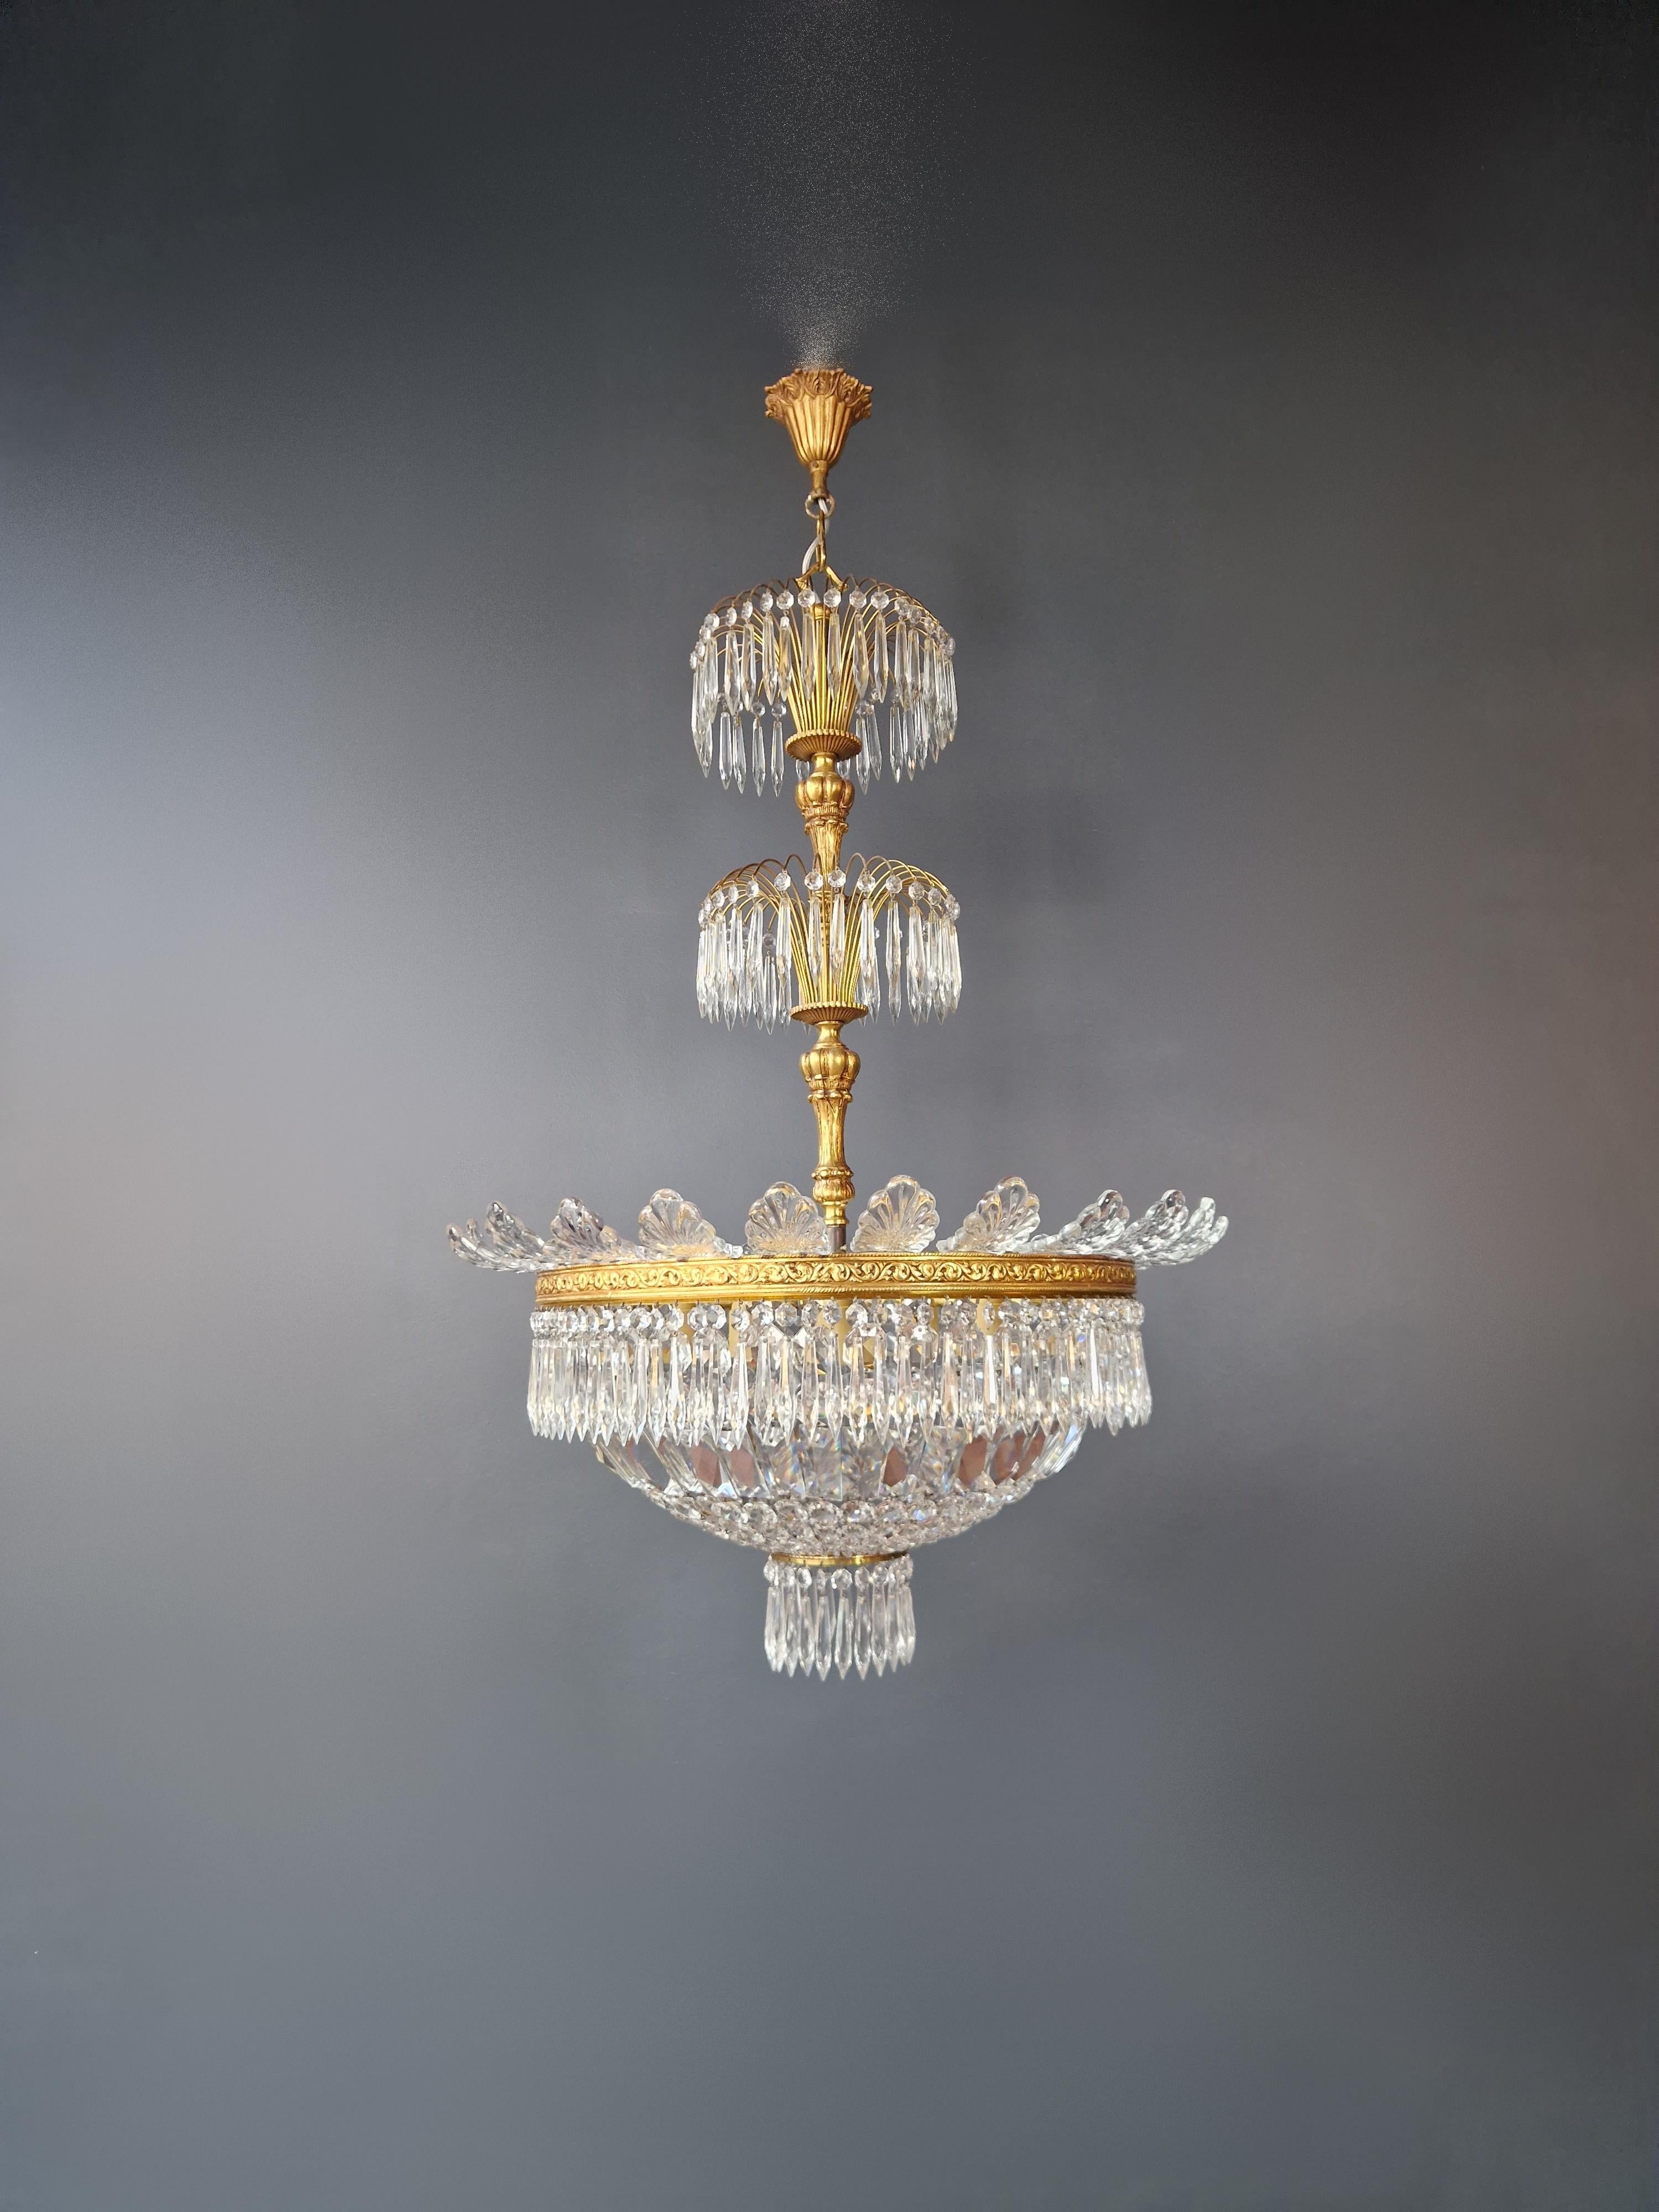 Introducing two exquisite basket chandeliers, available as a pair! Both have been lovingly and professionally restored in Berlin, with electrical wiring compatible with the US. They have been re-wired and are ready to hang, with not a single crystal